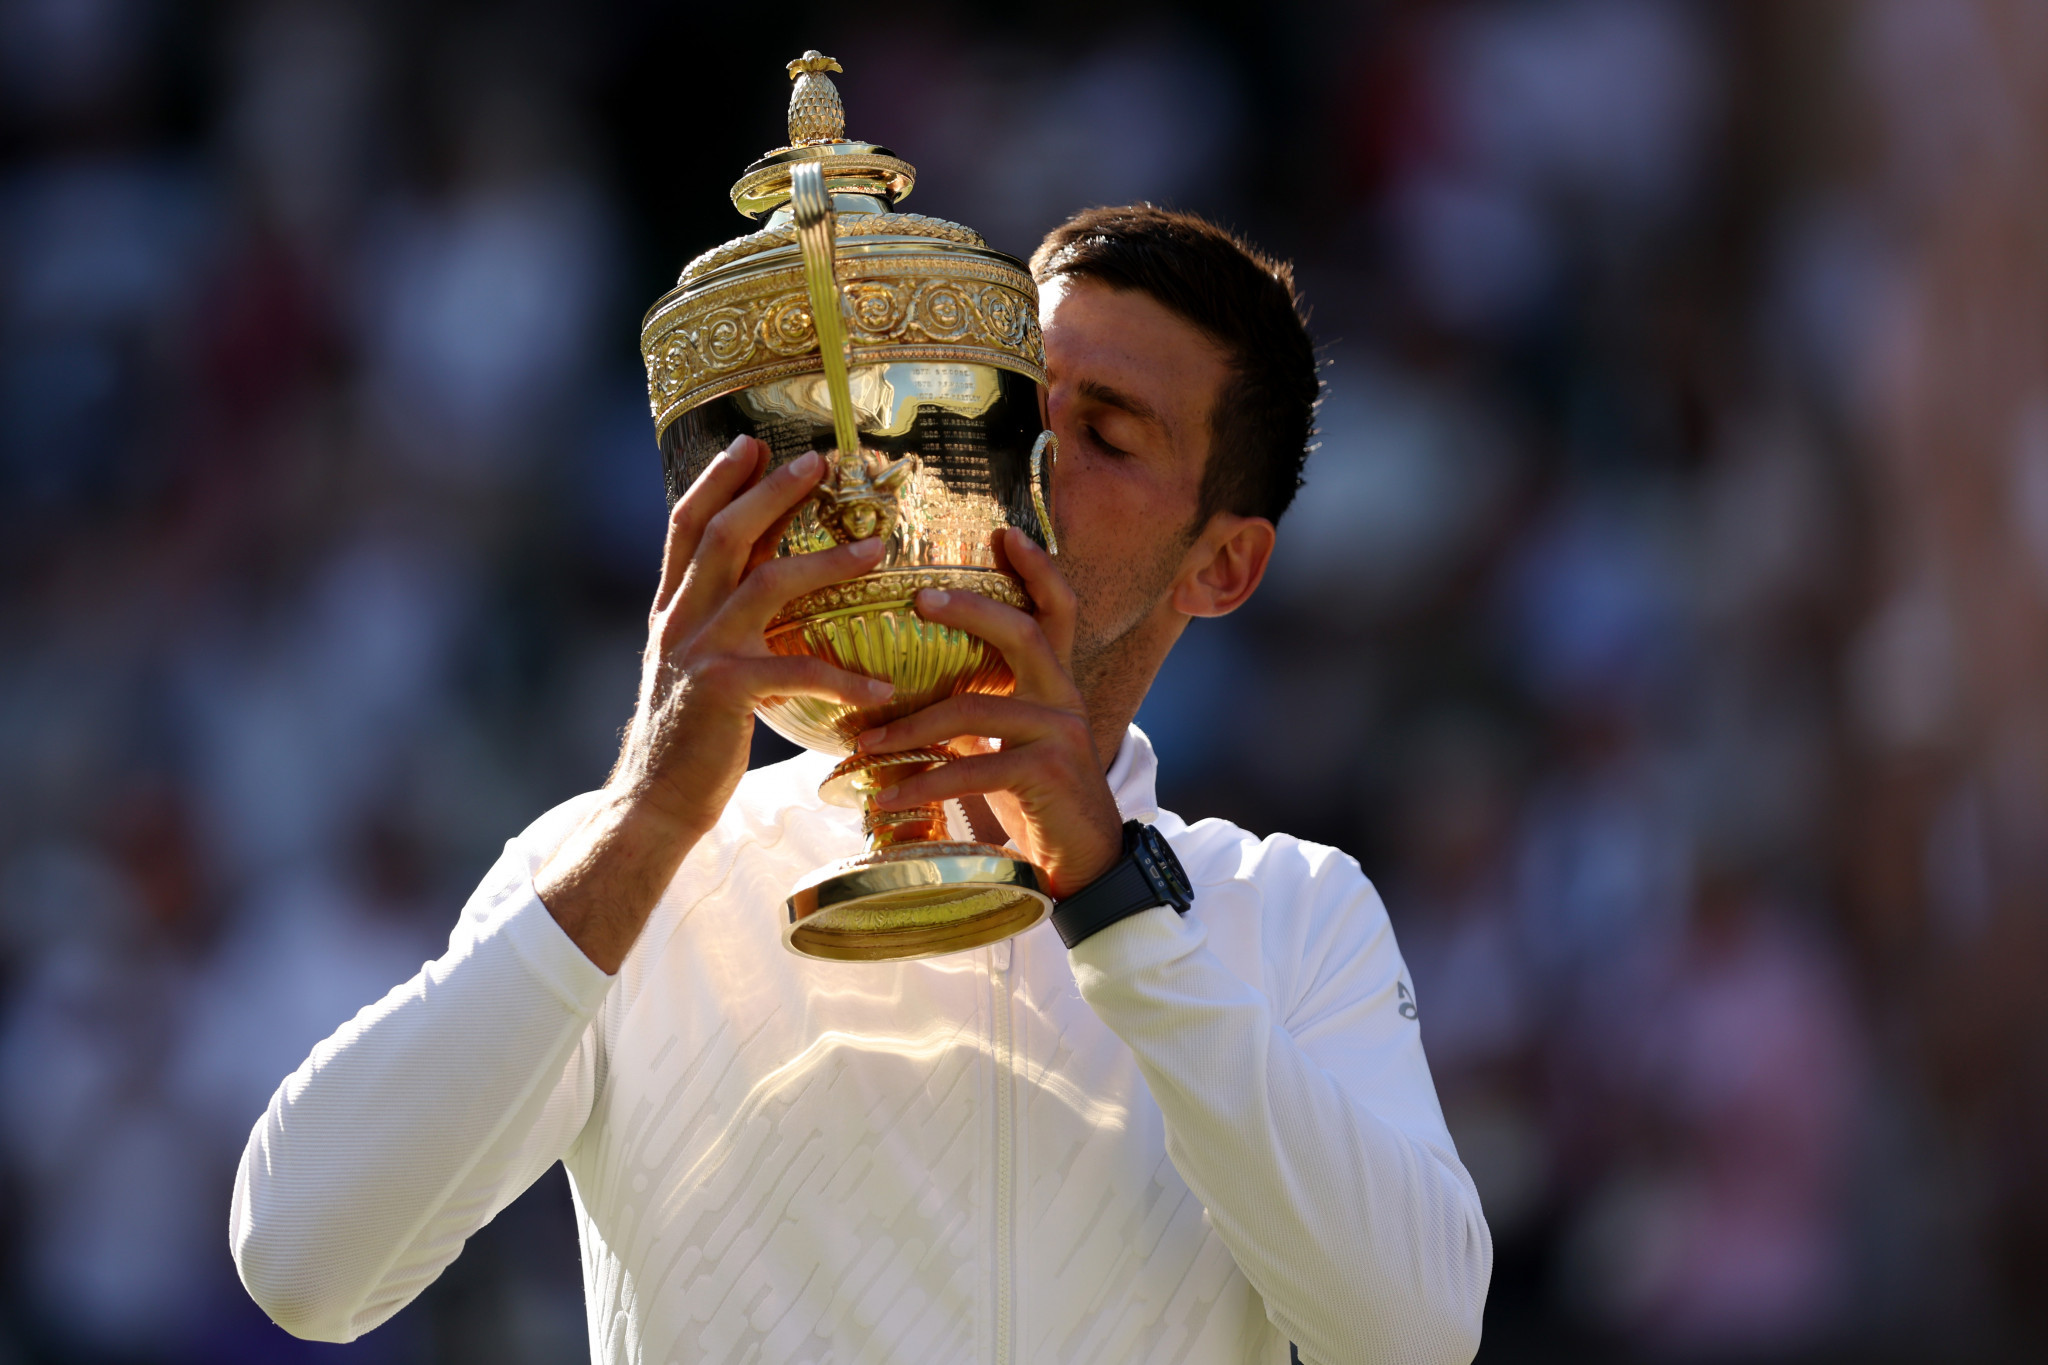 Djokovic claims fourth Wimbledon title in a row against Kyrgios as Peng Shuai protester interrupts play 